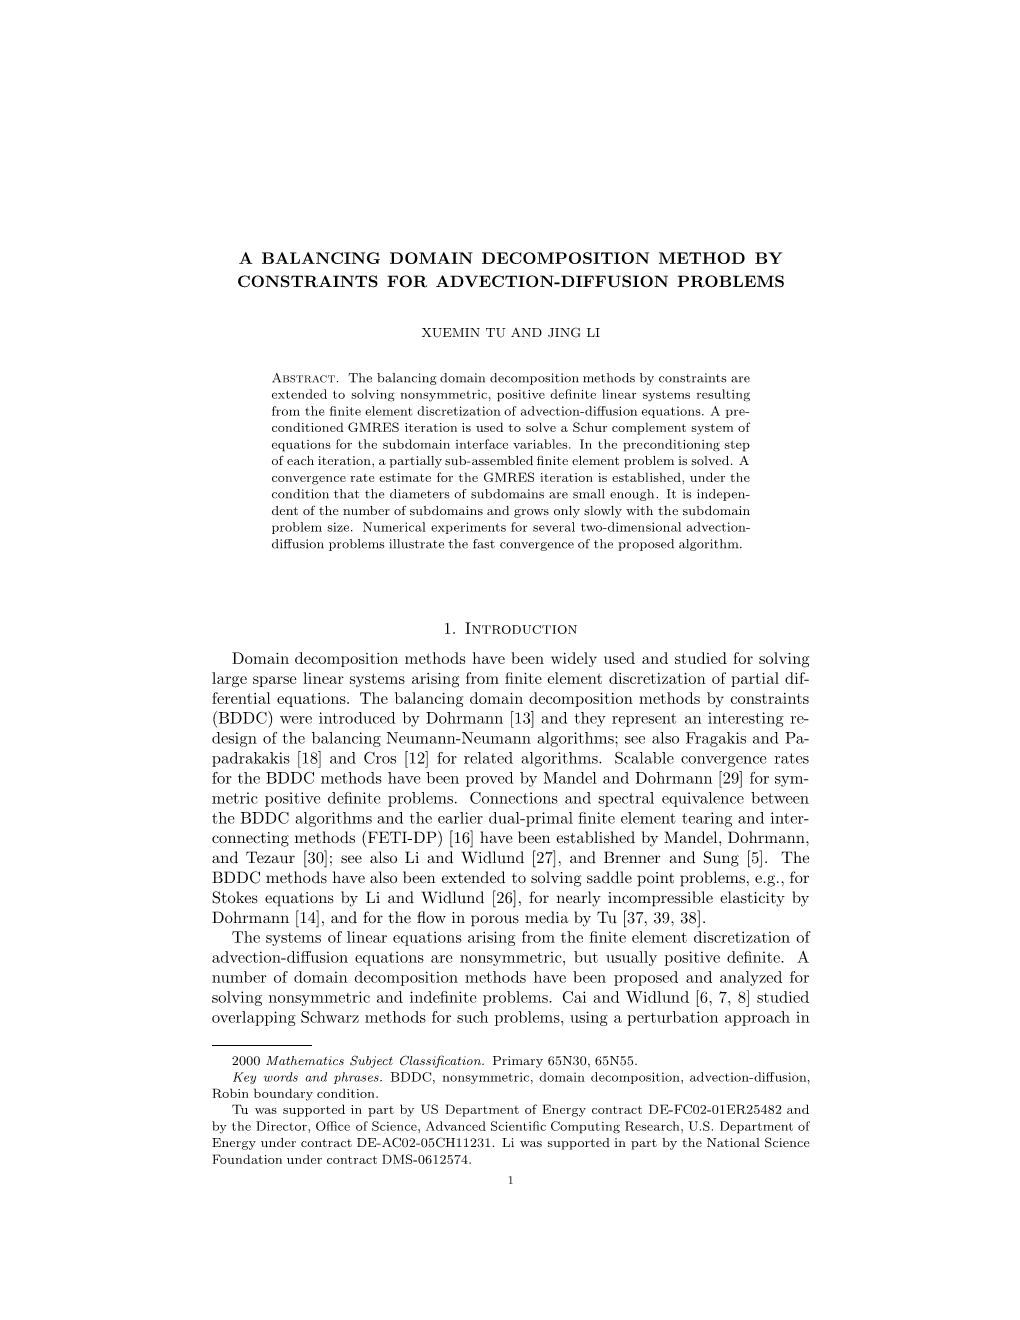 A Balancing Domain Decomposition Method by Constraints for Advection-Diffusion Problems